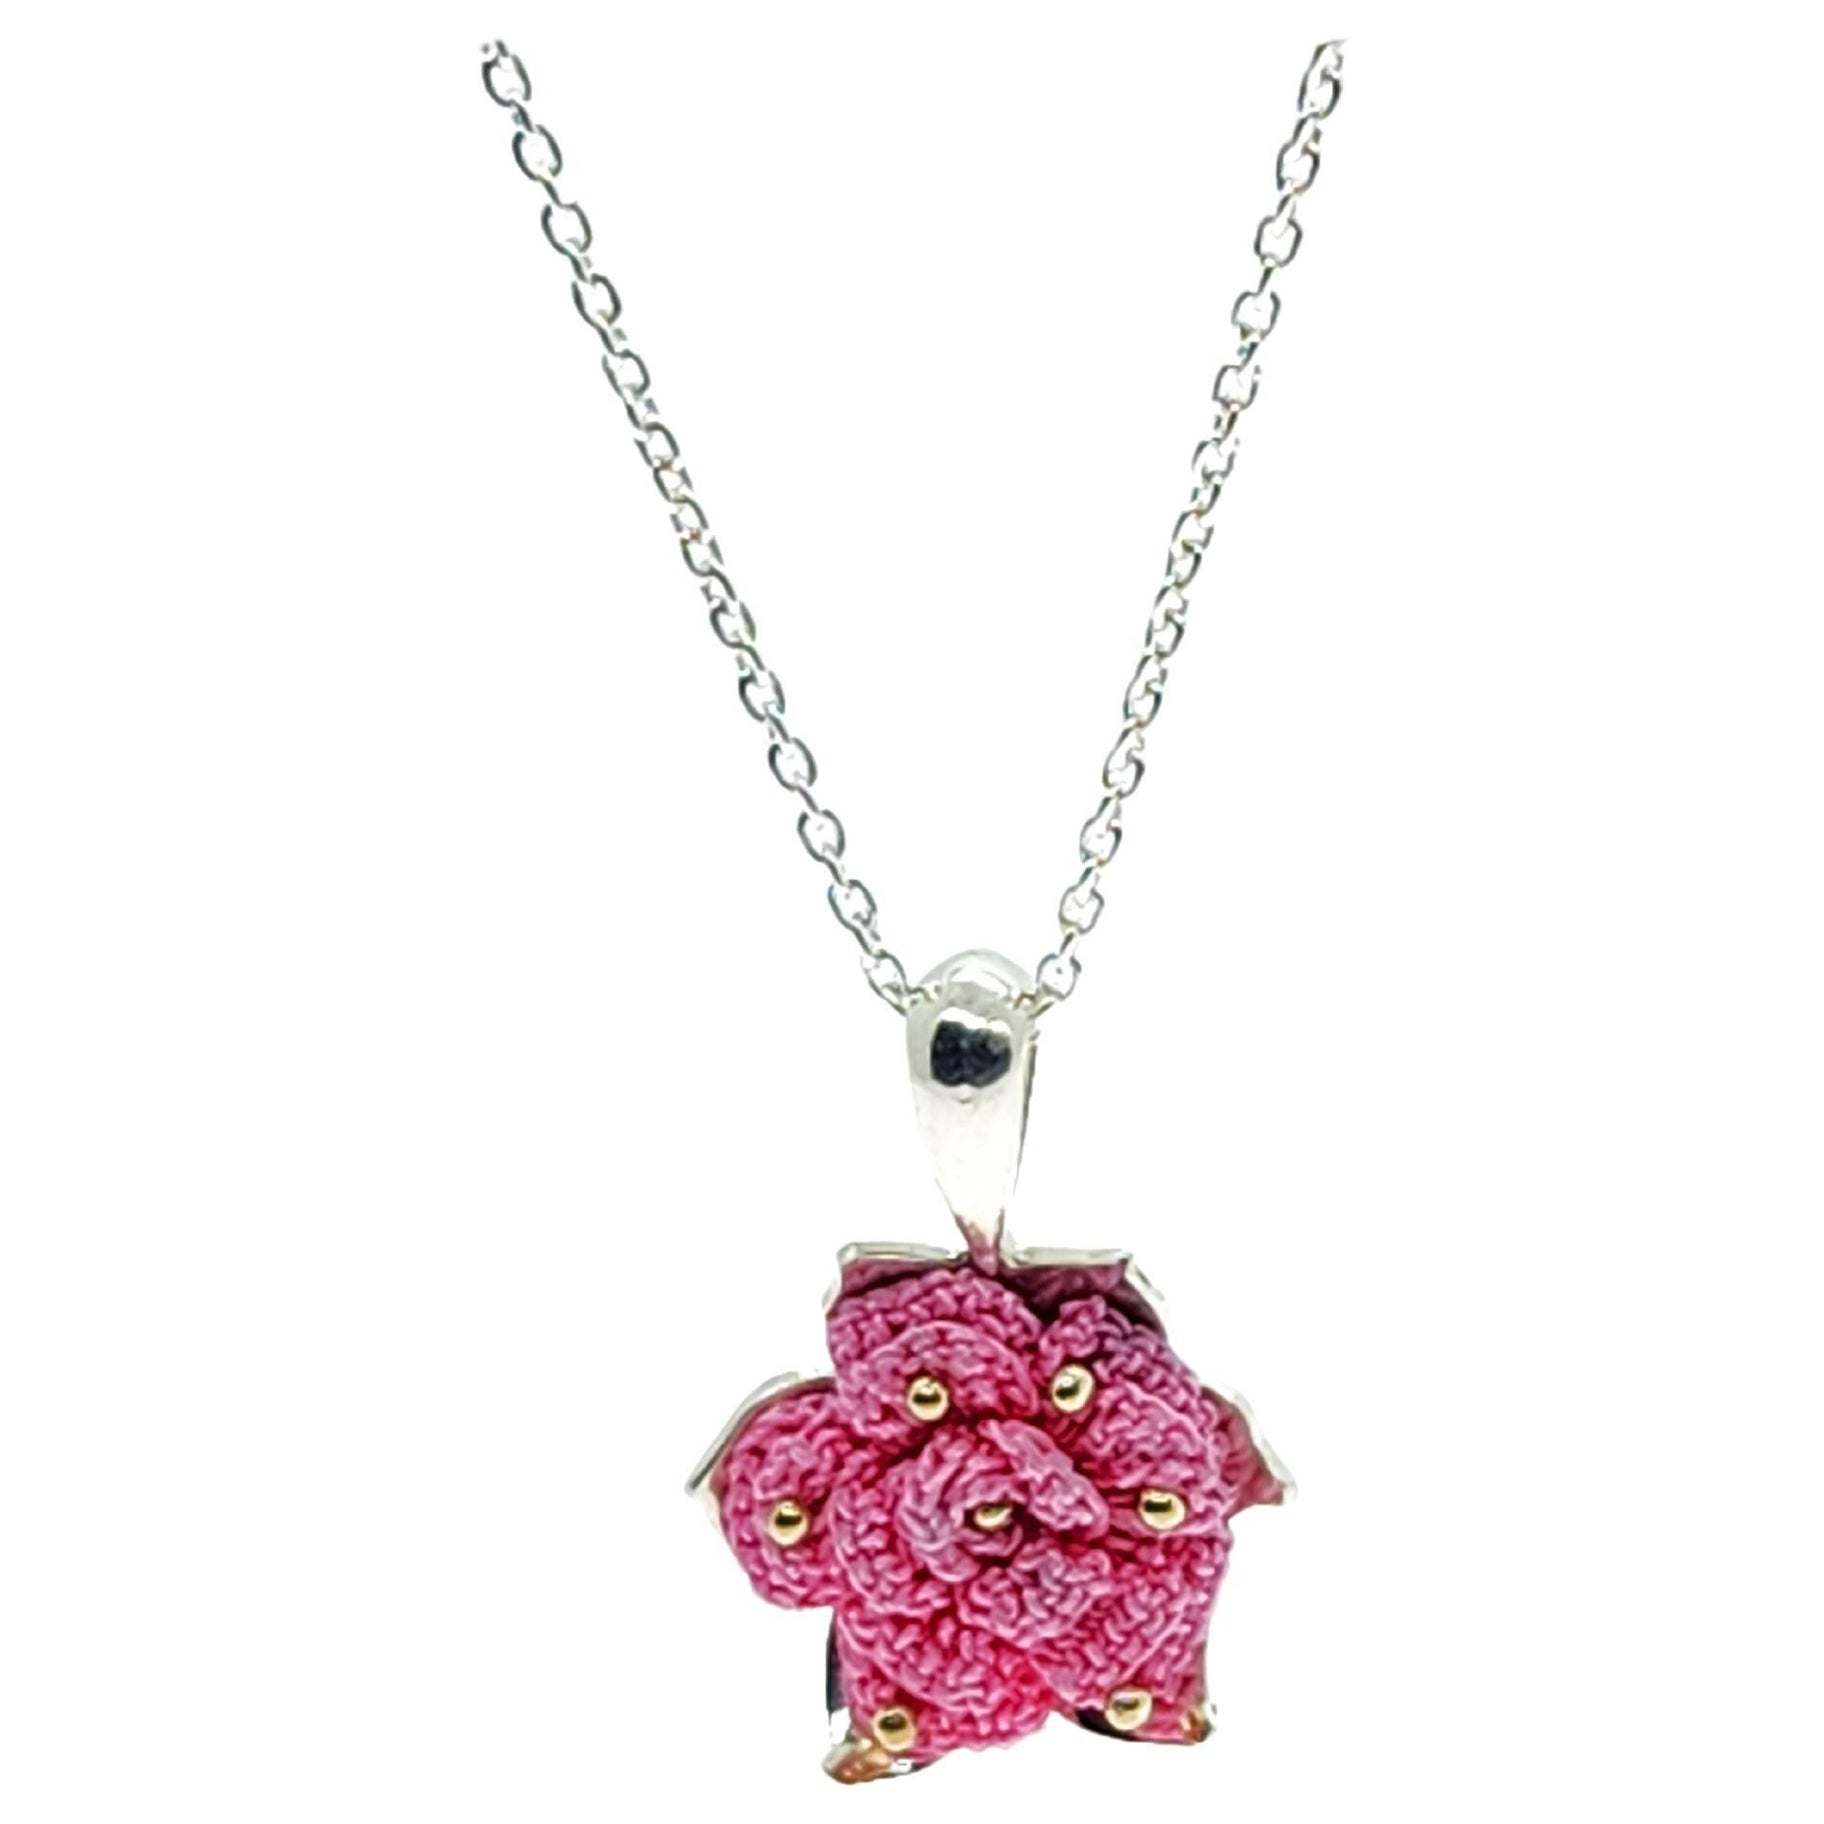 Hand Knit Flower Necklace in Handmade Sterling Silver and 14KY Setting #3